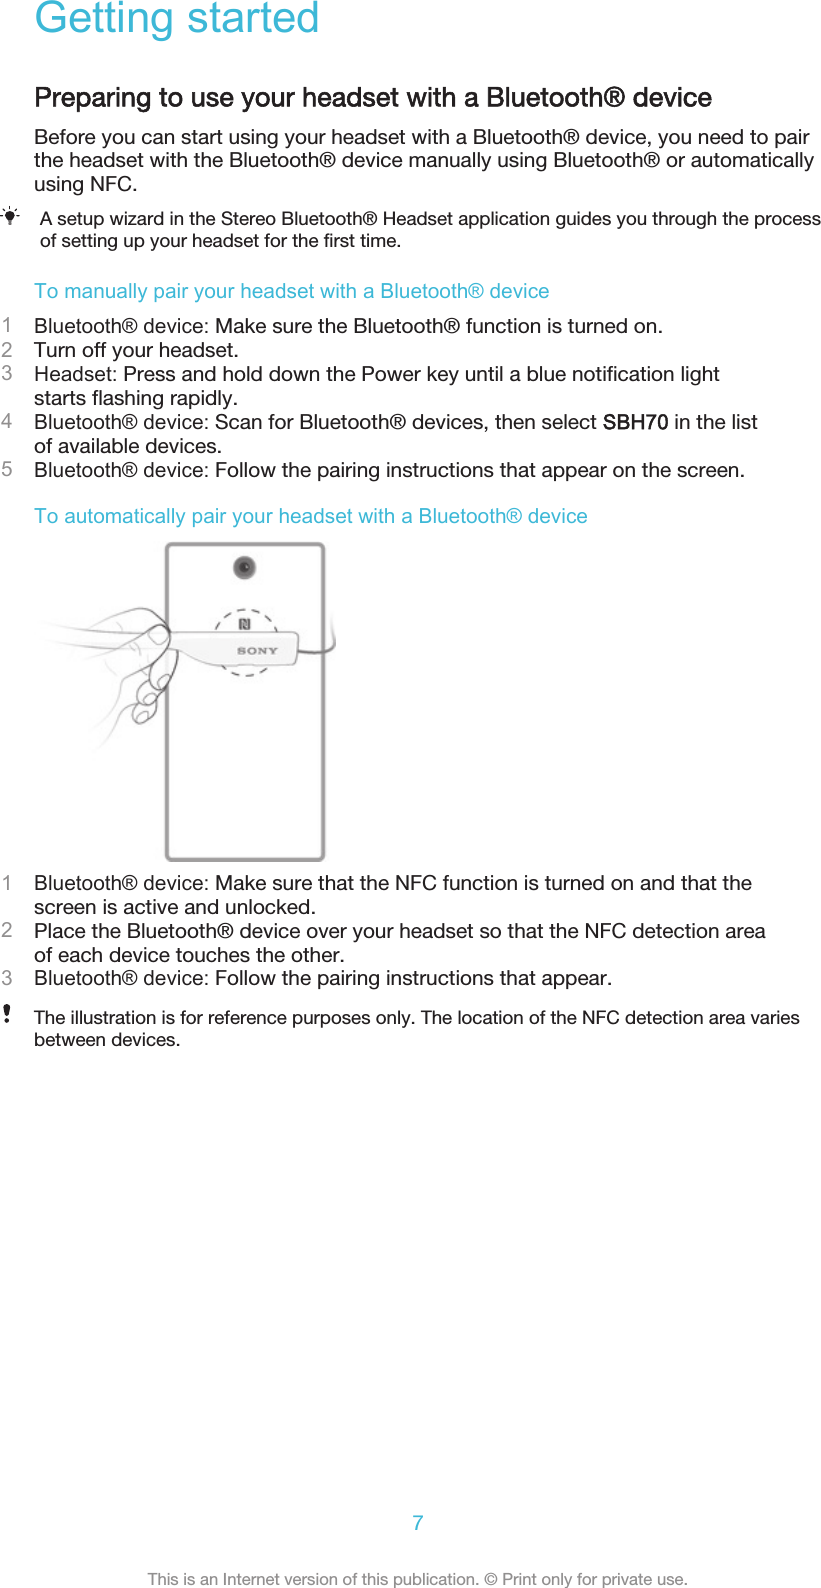 Getting startedPreparing to use your headset with a Bluetooth® deviceBefore you can start using your headset with a Bluetooth® device, you need to pairthe headset with the Bluetooth® device manually using Bluetooth® or automaticallyusing NFC.A setup wizard in the Stereo Bluetooth® Headset application guides you through the processof setting up your headset for the first time.To manually pair your headset with a Bluetooth® device1Bluetooth® device: Make sure the Bluetooth® function is turned on.2Turn off your headset.3Headset: Press and hold down the Power key until a blue notification lightstarts flashing rapidly.4Bluetooth® device: Scan for Bluetooth® devices, then select SBH70 in the listof available devices.5Bluetooth® device: Follow the pairing instructions that appear on the screen.To automatically pair your headset with a Bluetooth® device1Bluetooth® device: Make sure that the NFC function is turned on and that thescreen is active and unlocked.2Place the Bluetooth® device over your headset so that the NFC detection areaof each device touches the other.3Bluetooth® device: Follow the pairing instructions that appear.The illustration is for reference purposes only. The location of the NFC detection area variesbetween devices.7This is an Internet version of this publication. © Print only for private use.